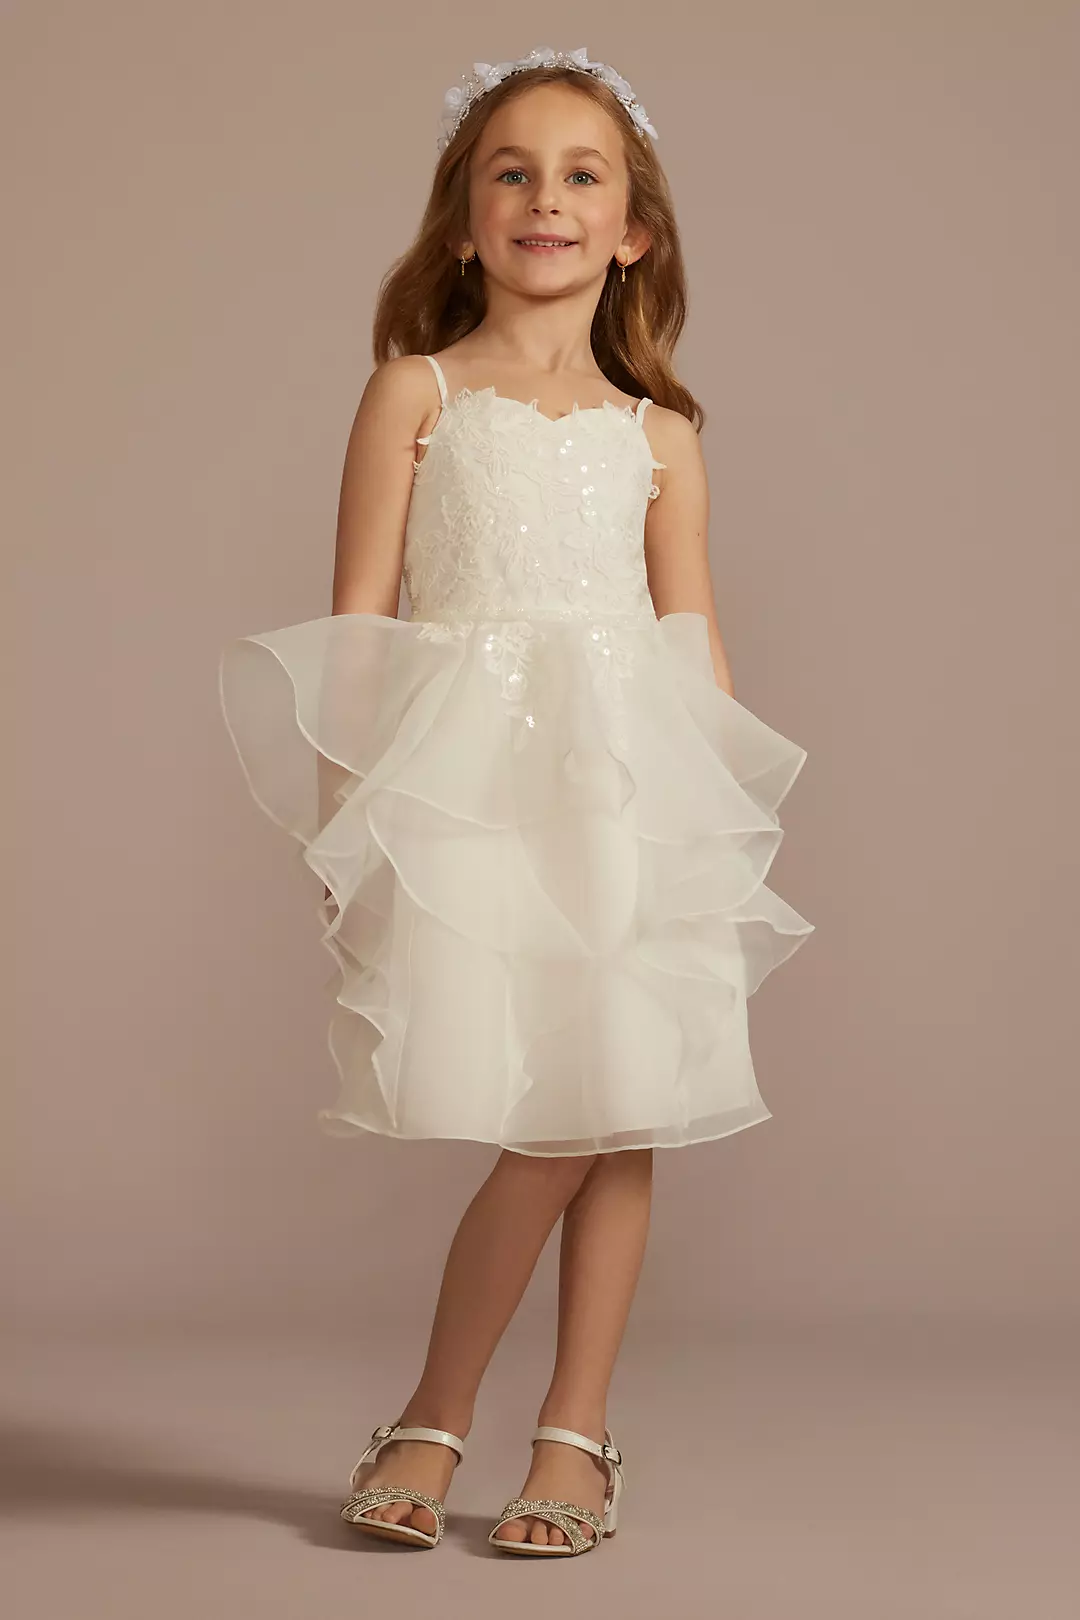 David's Bridal Flower Girl Dress with Tulle and Ribbon Waist OP218 Ivory 24M - Ivory, 24M